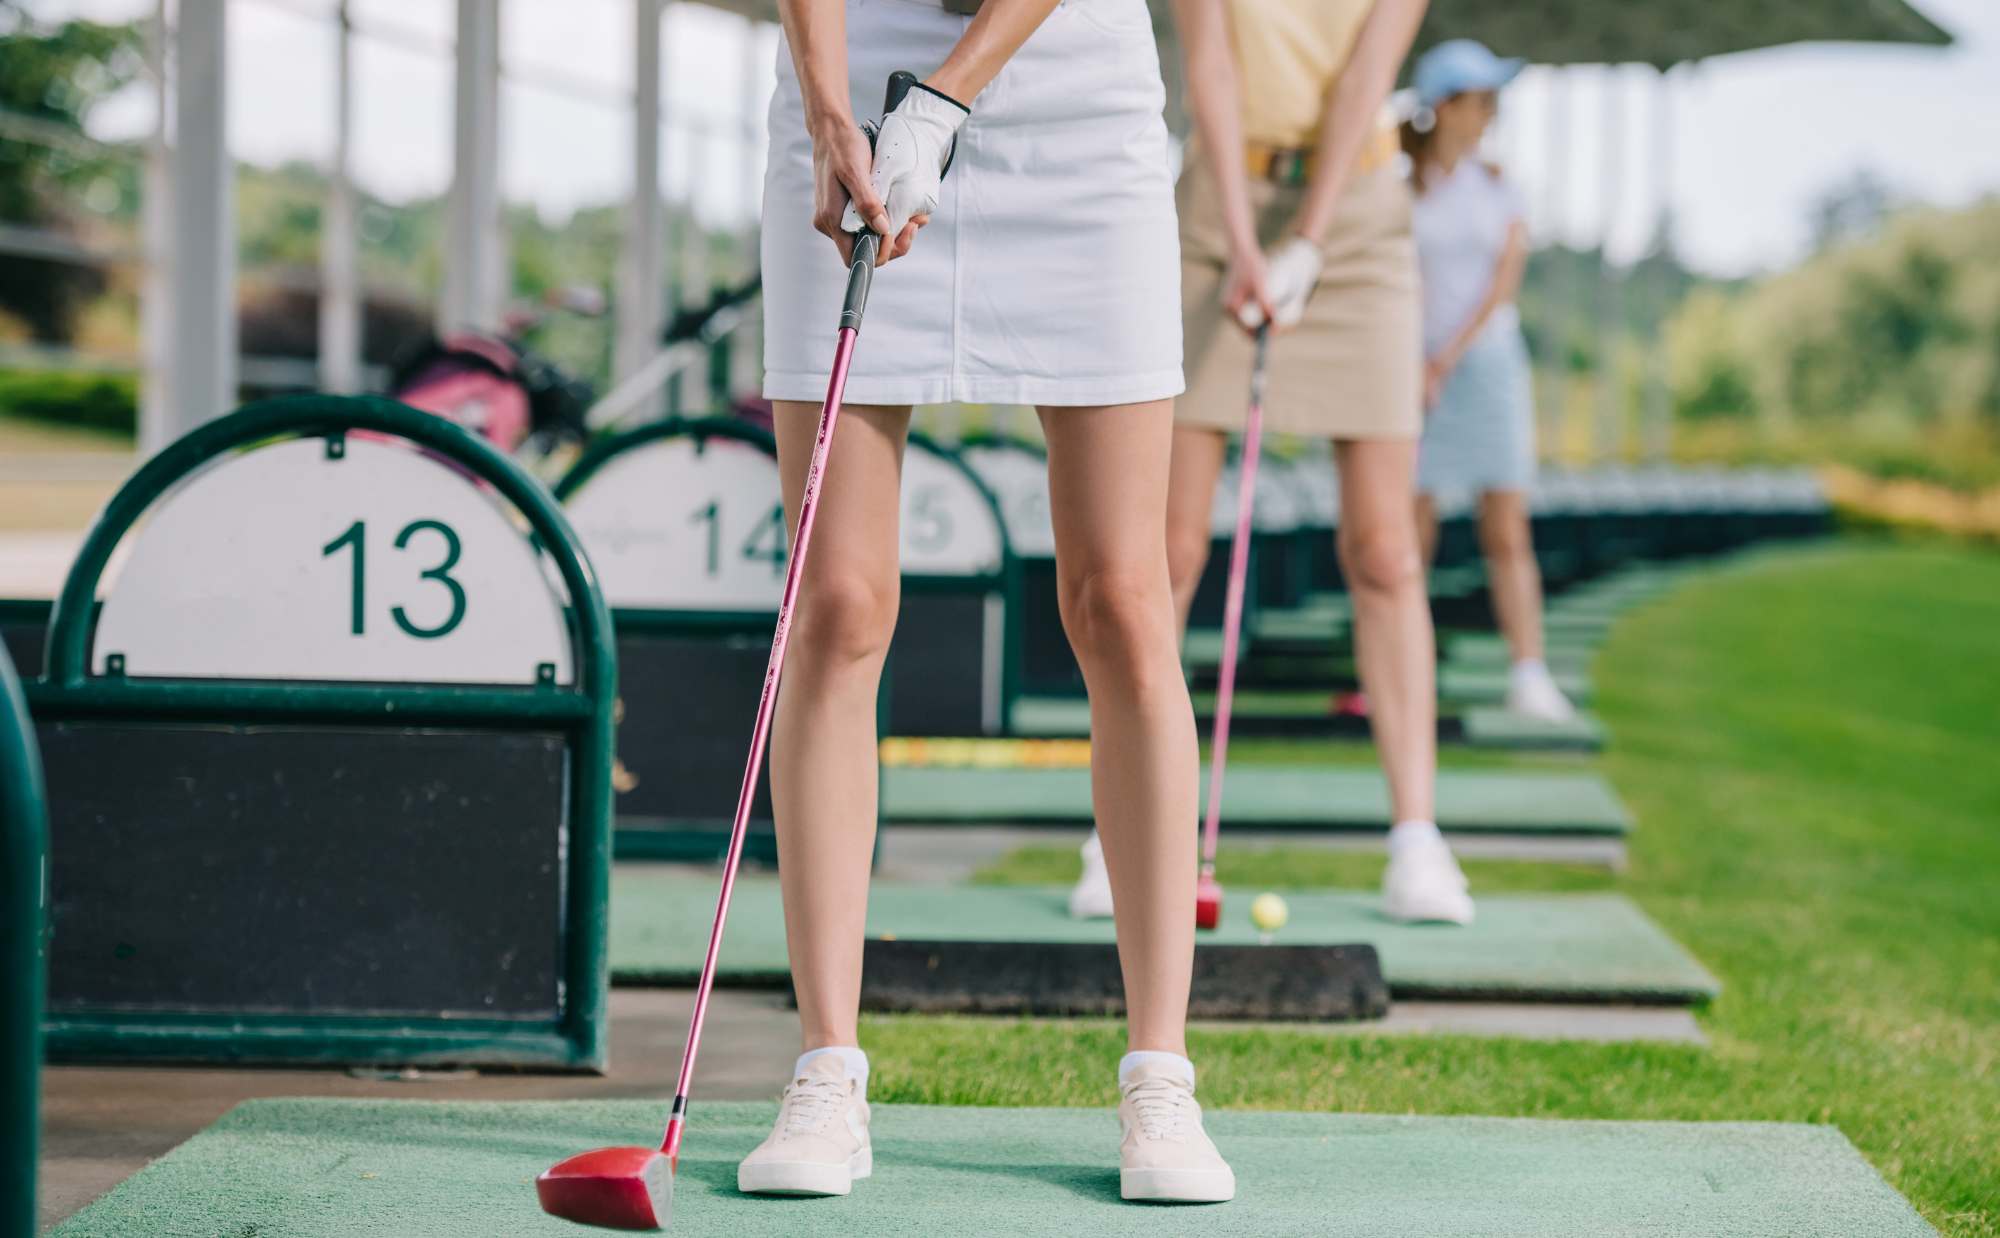 Is there really an 'appropriate' golf-skirt length? We asked around